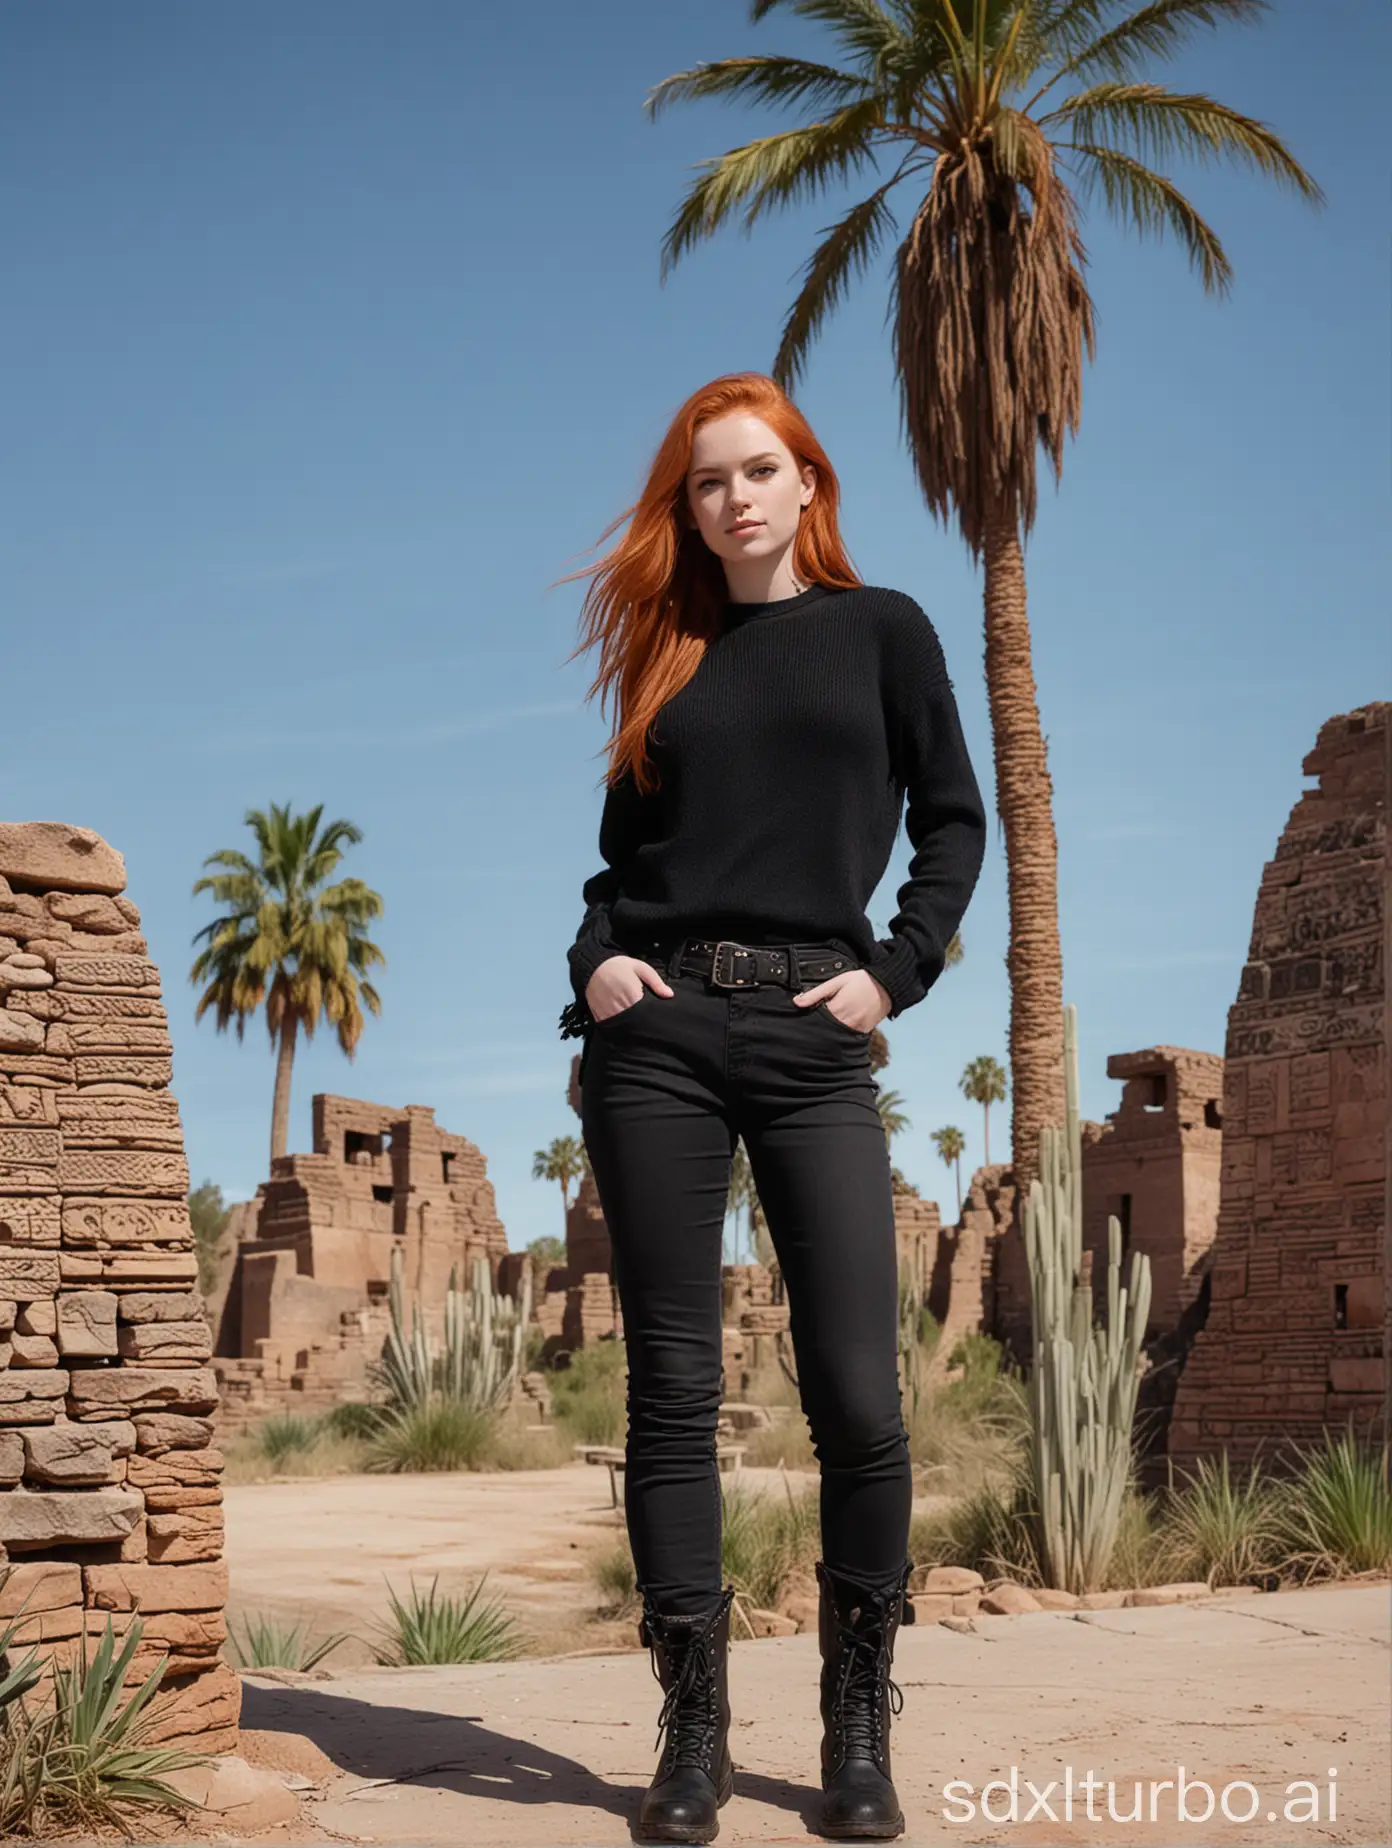 Redheaded-Girl-in-Black-Jeans-and-Sweater-Amidst-Aztec-Ruins-and-Palm-Trees